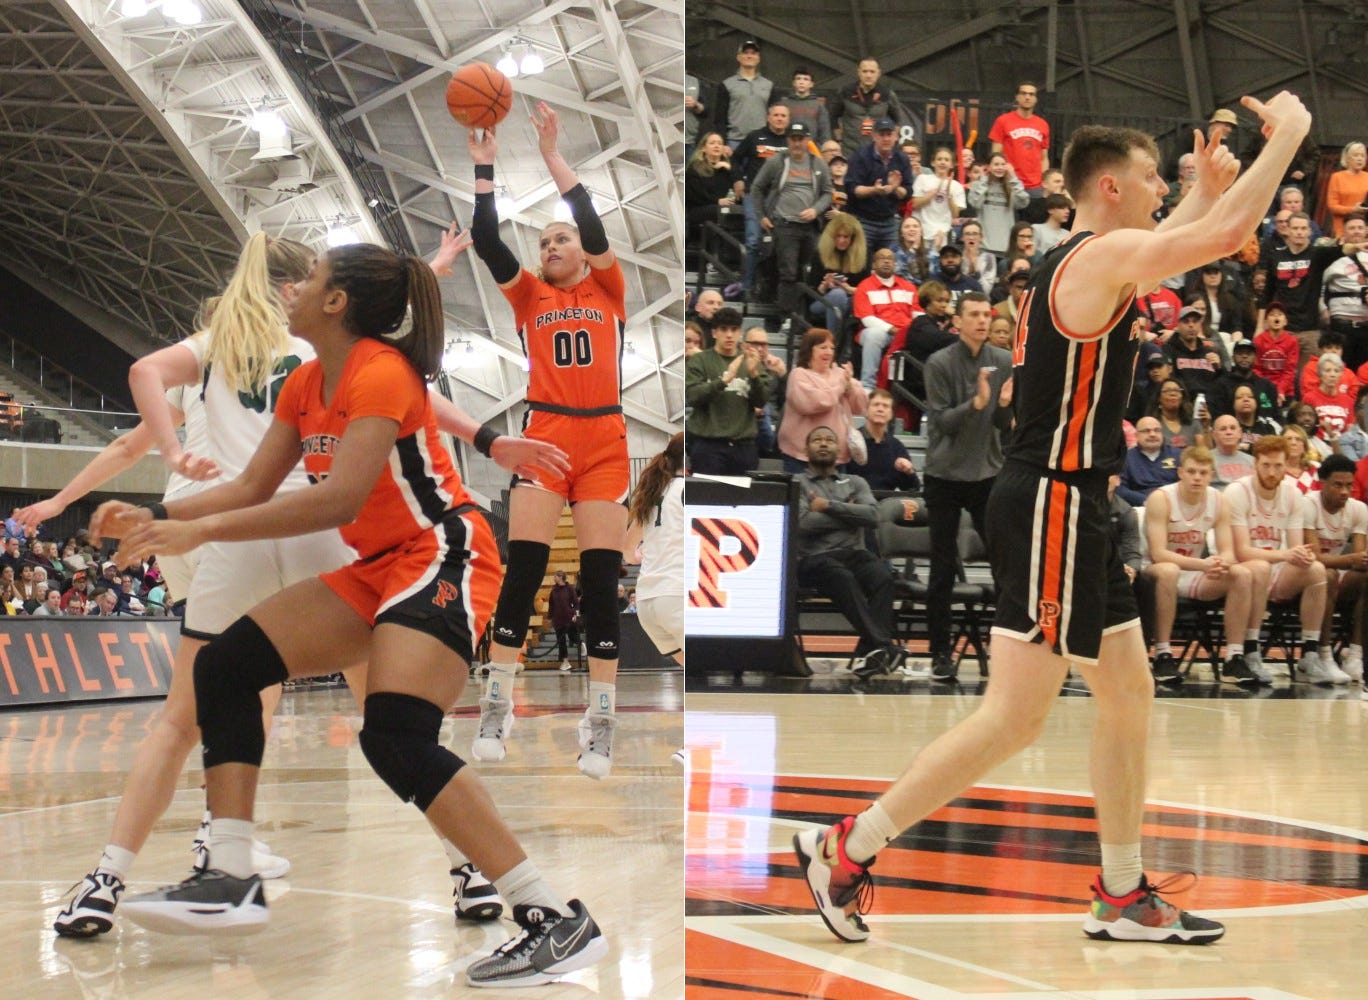 Left: Ellie Mitchell (00) makes a shot while Chet Nweke boxes out during Princeton’s win over Dartmouth. Right: Matt Allocco calls to teammates during Princeton’s win over Cornell. (Photos by Adam Zielonka)